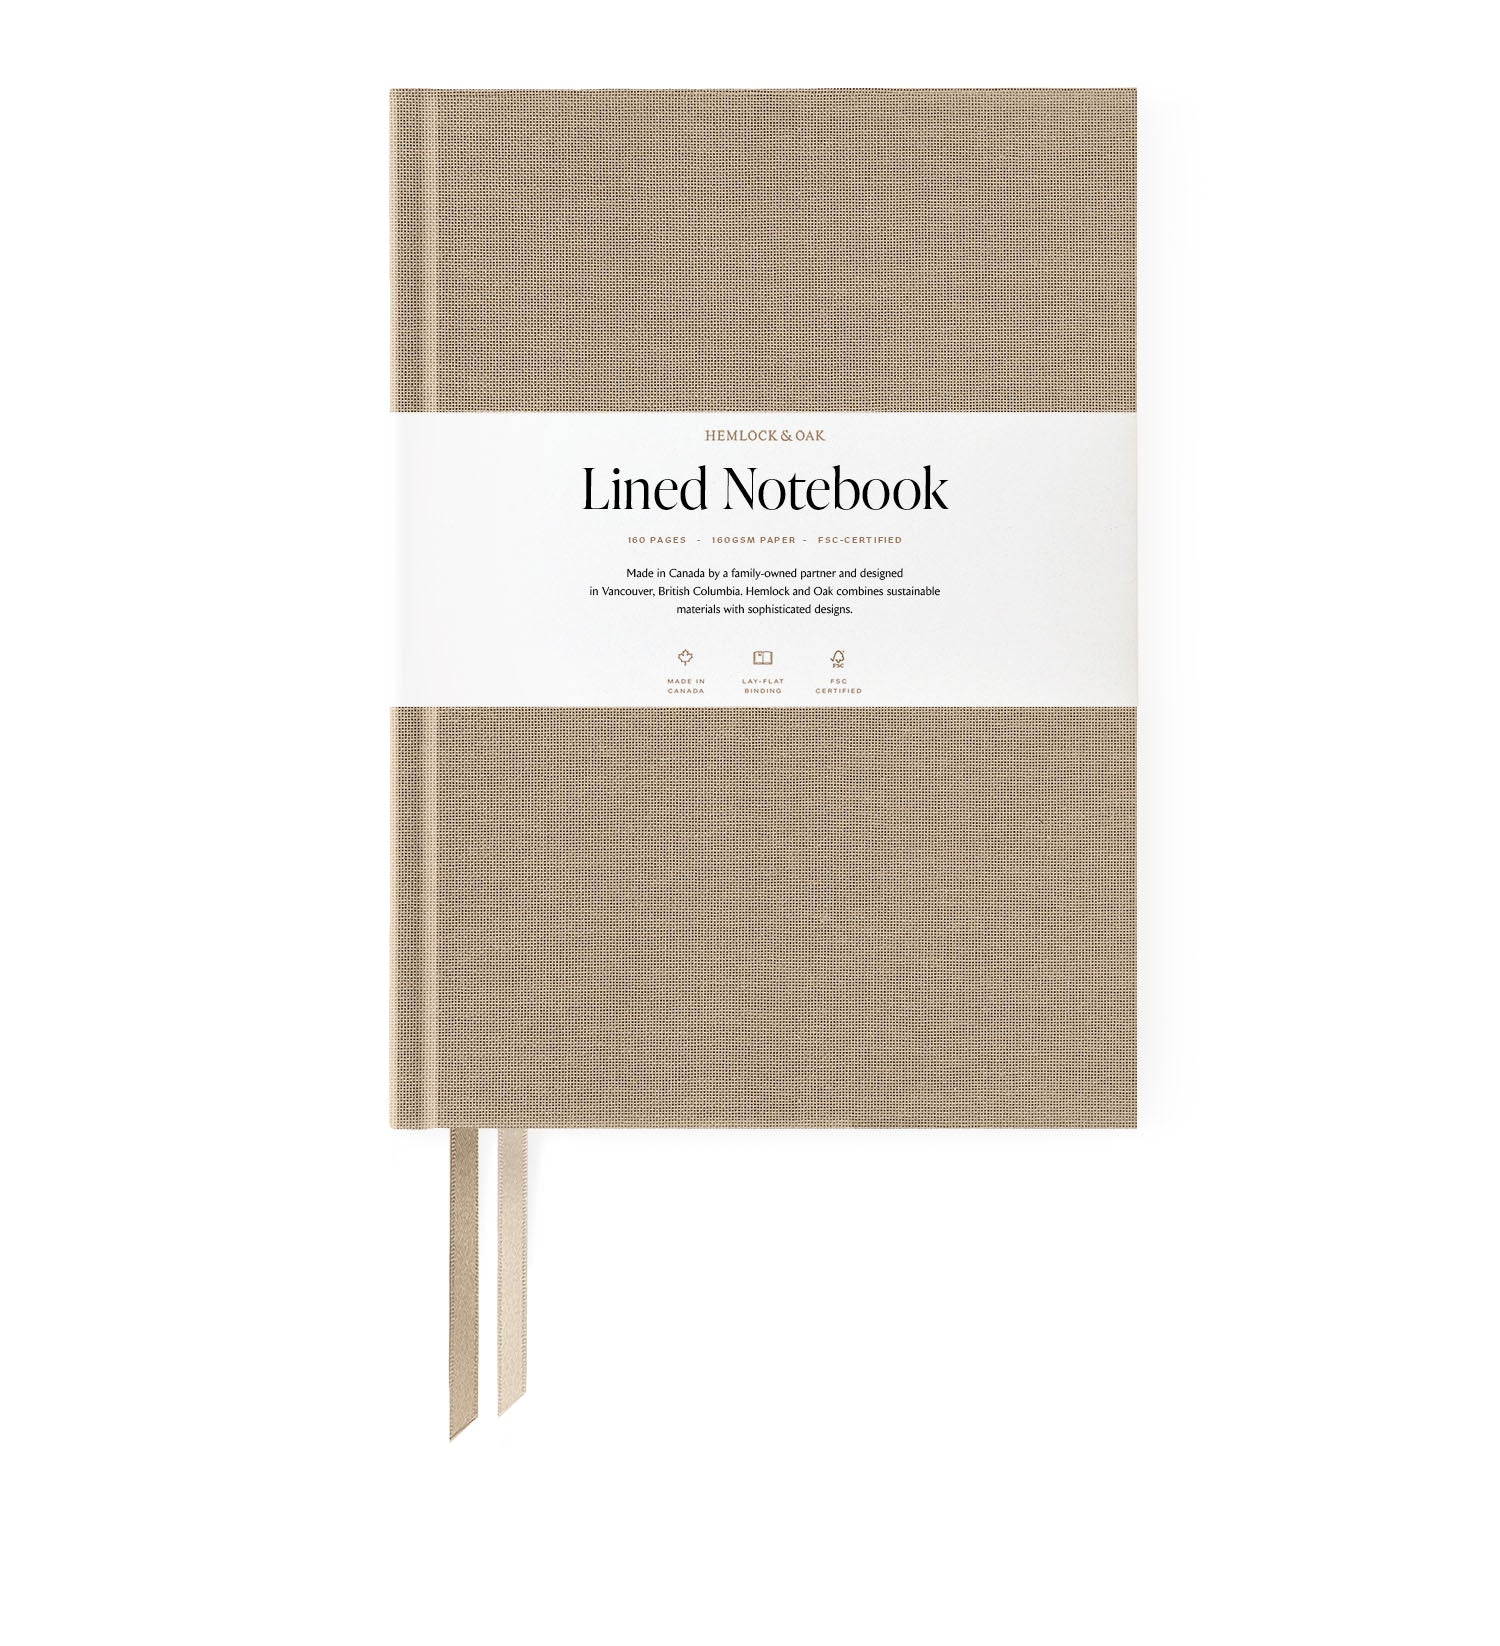 Notebooks (Imperfect) White Oak - Lined Paper - No Foil #color_ White Oak - Lined Paper - No Foil